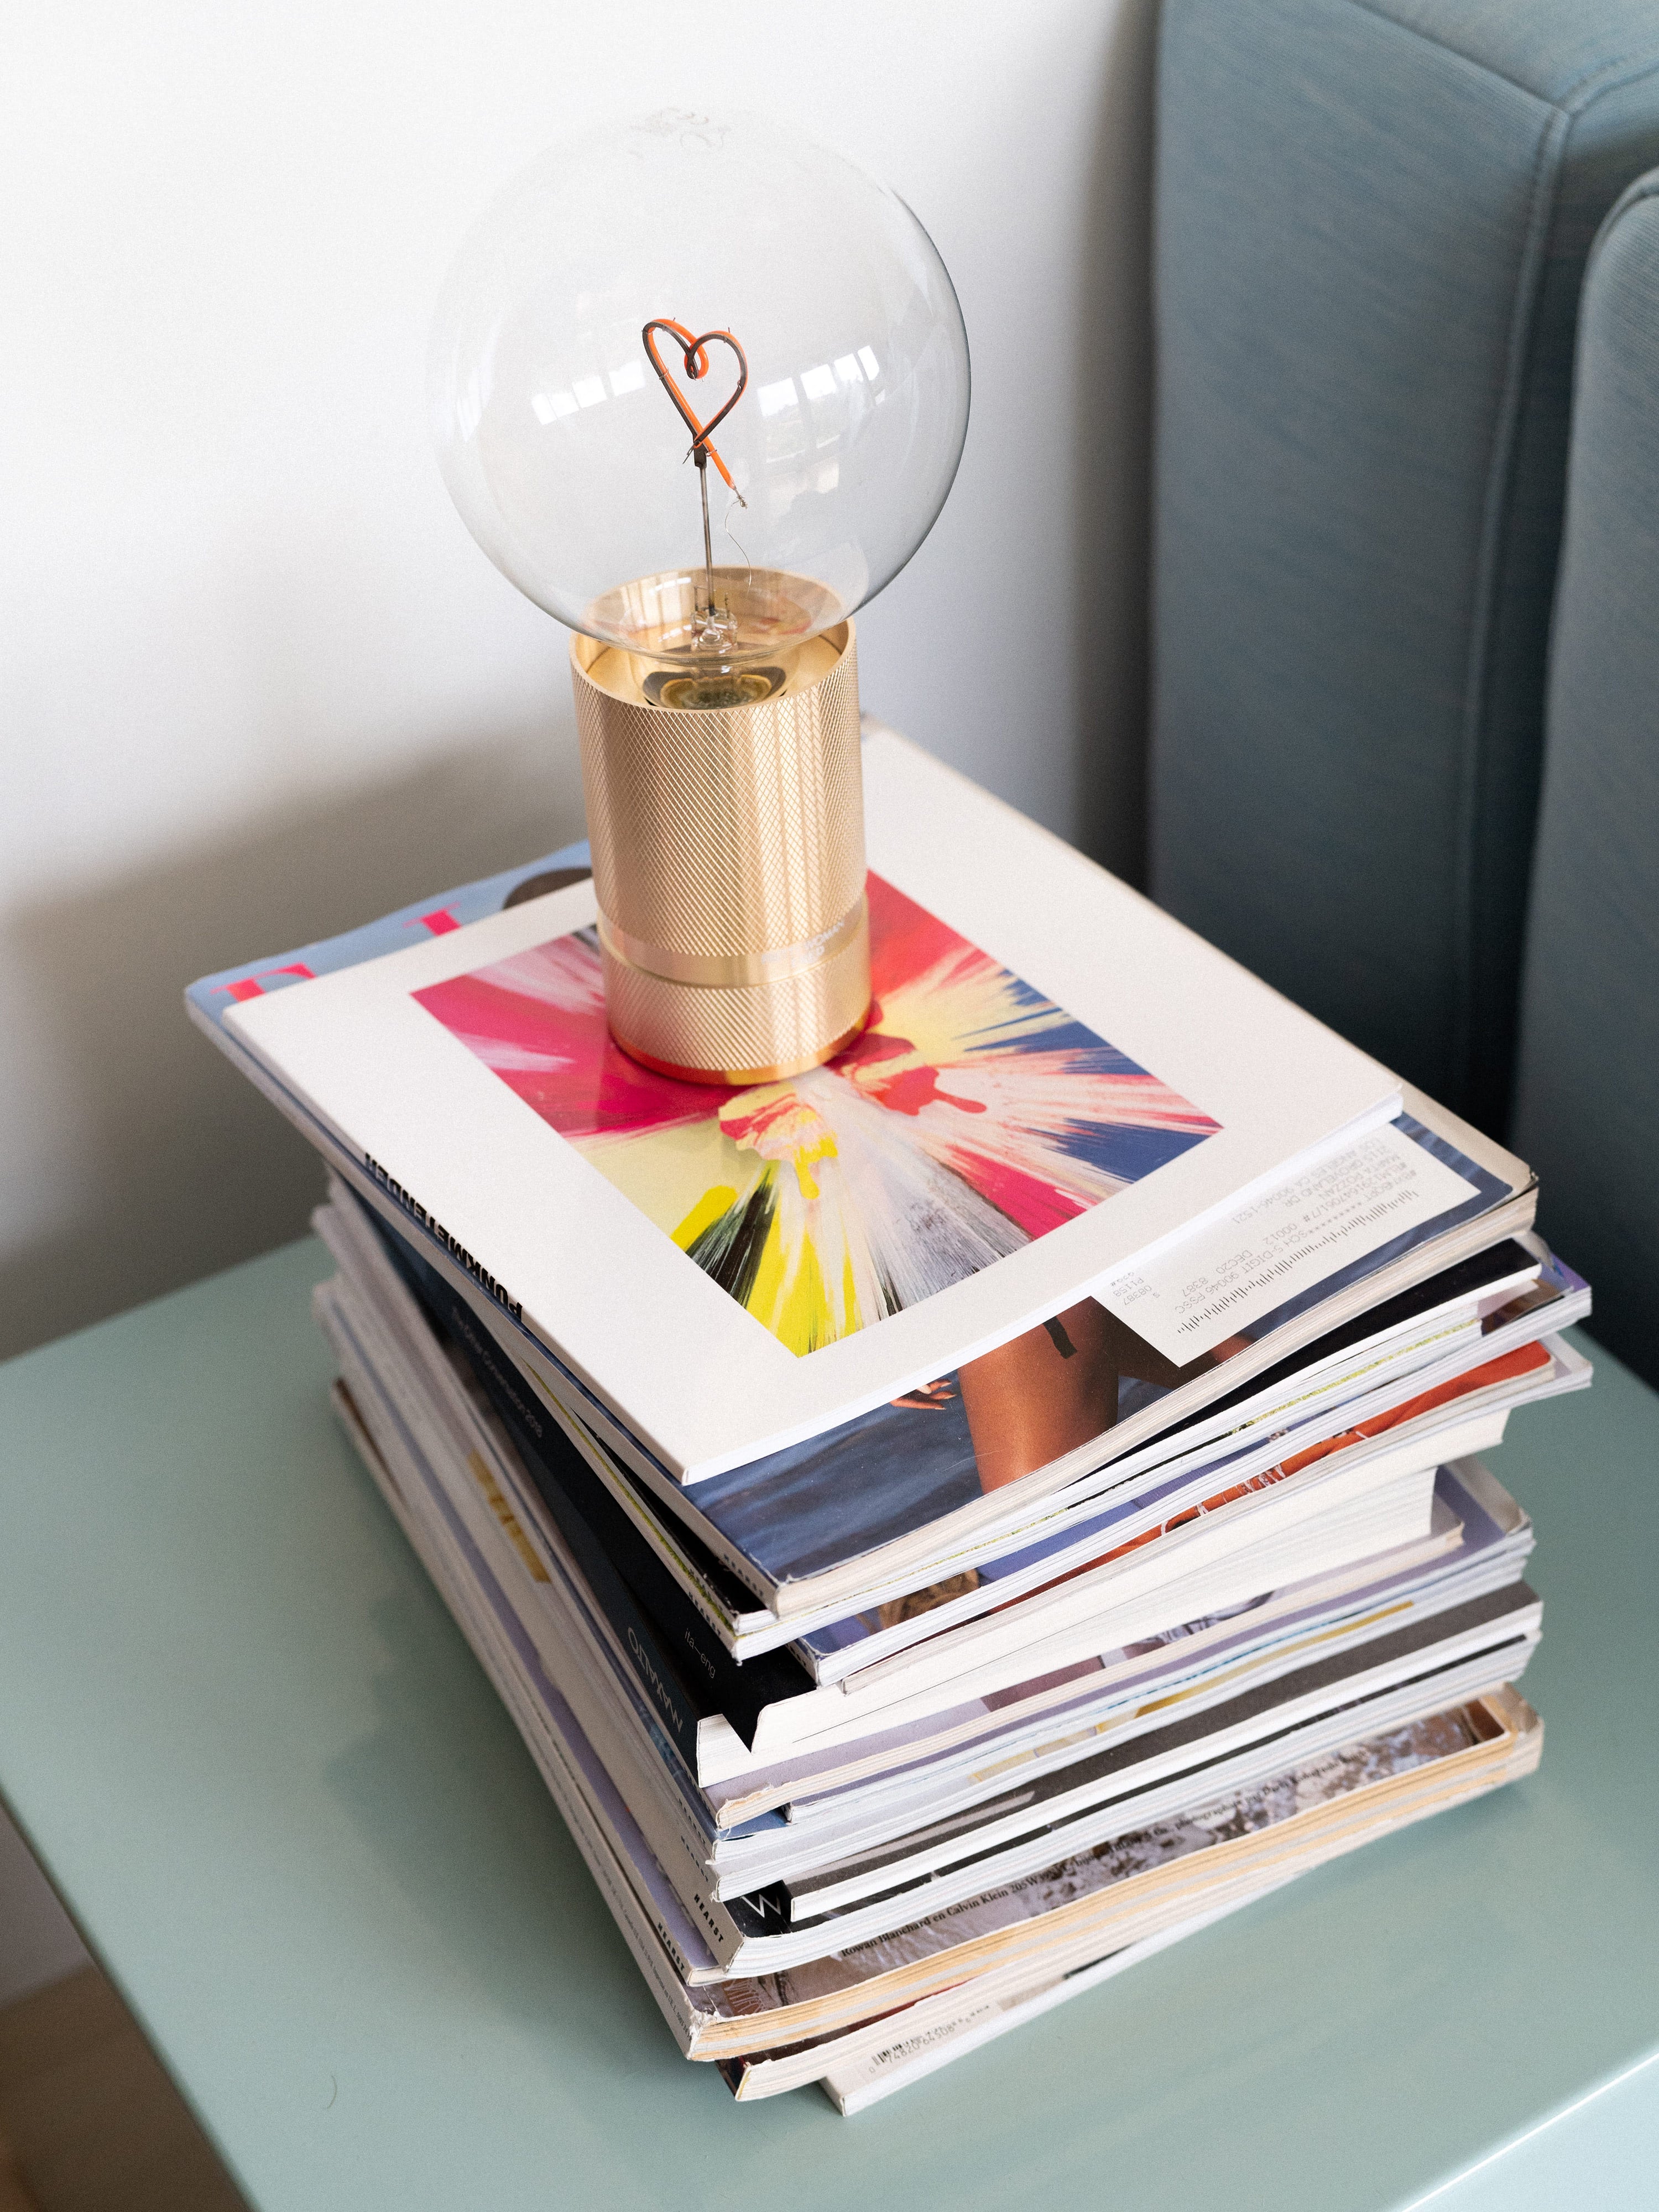 Marta Pozzan's magazines and lamp with a heart in it on a side table